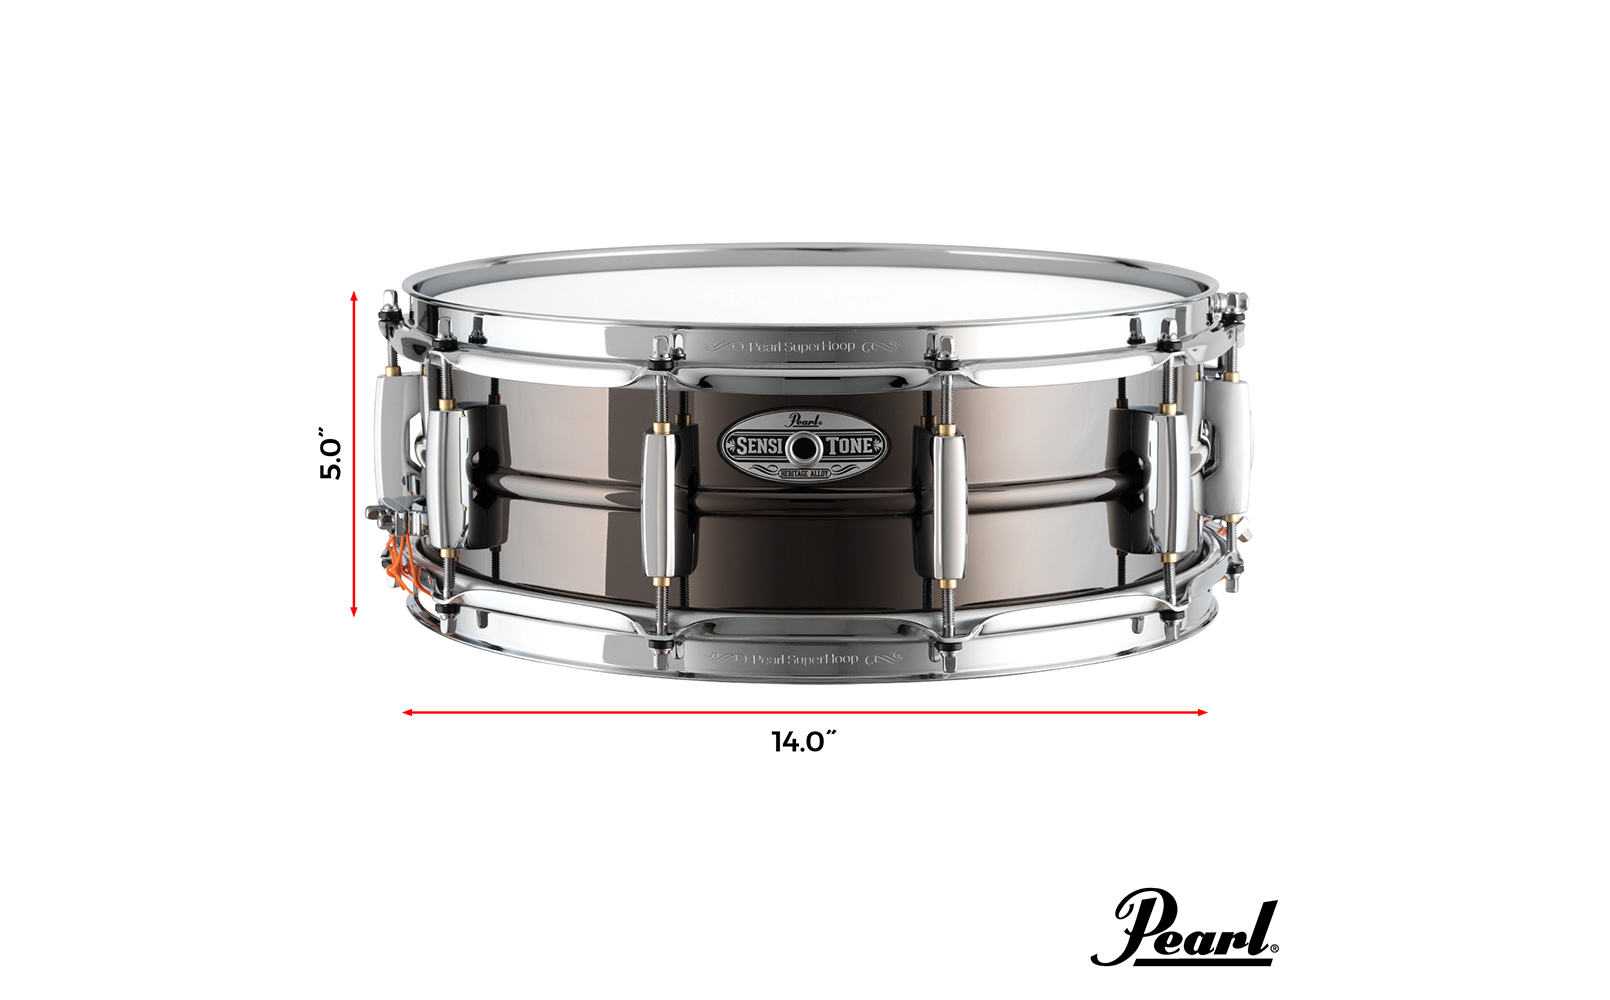 Heritage Alloy Black/Brass | Pearl Drums -Official site-